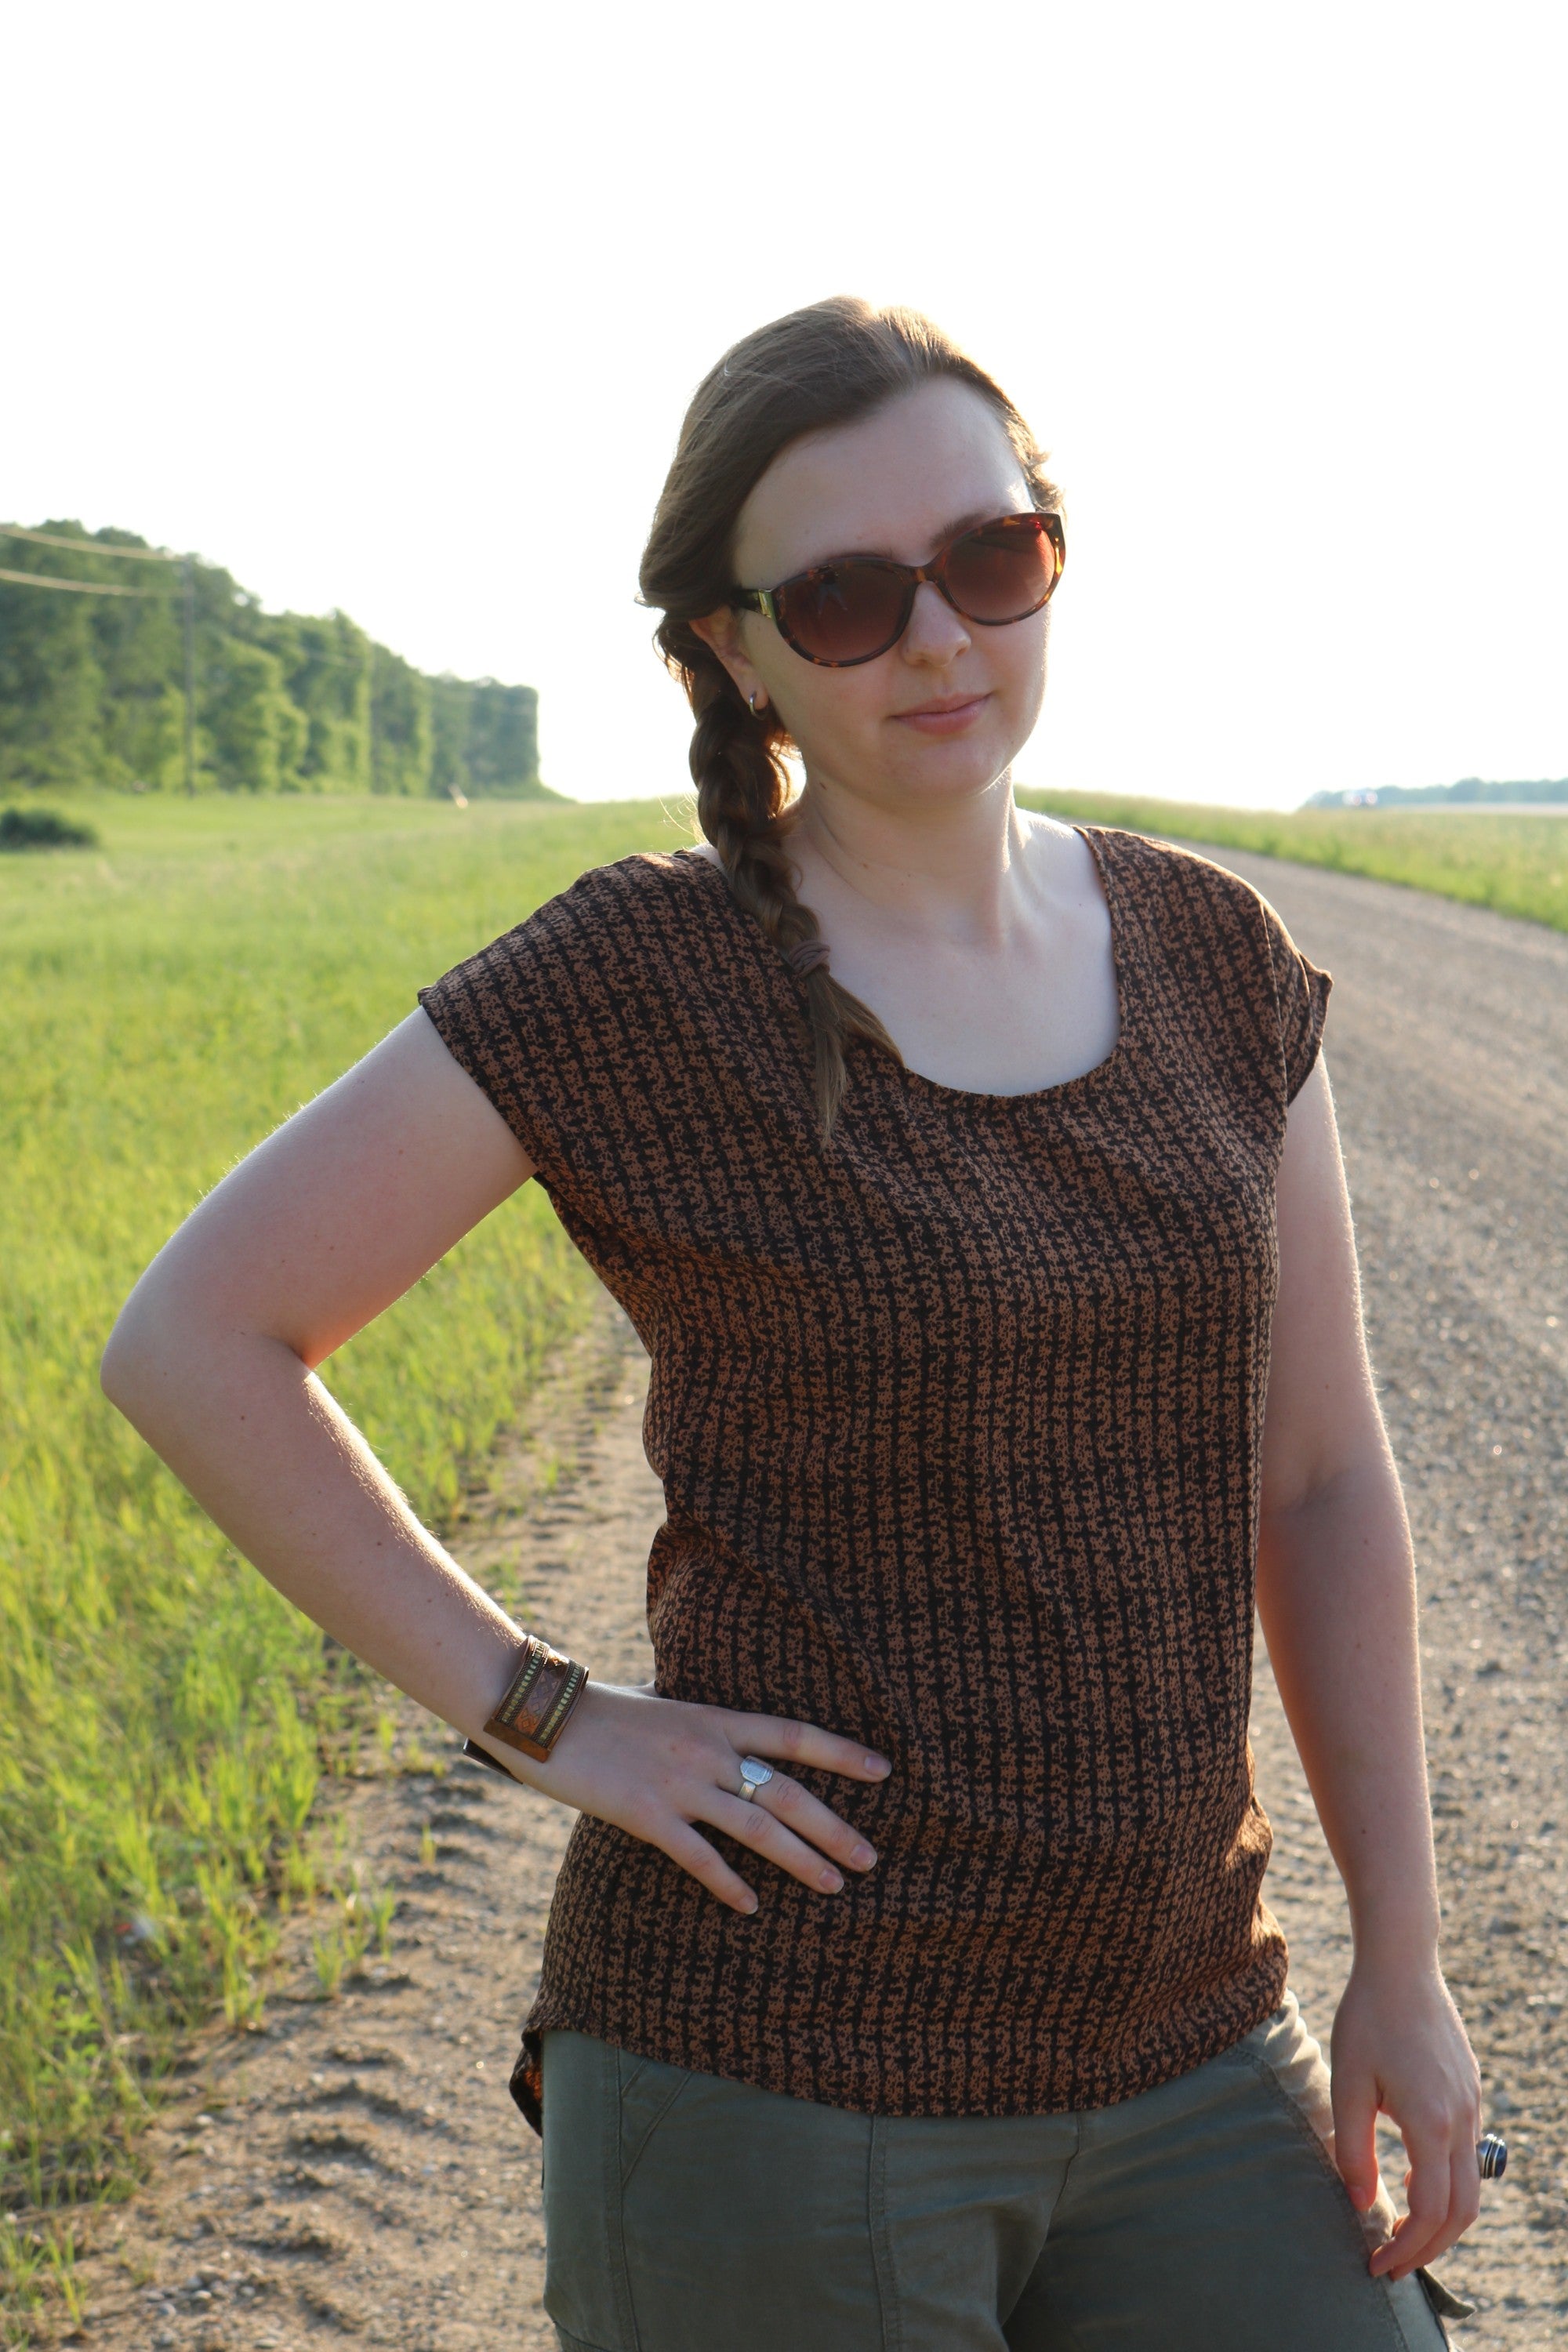 Classic Slouchy Tee in woven houndstooth brown and black